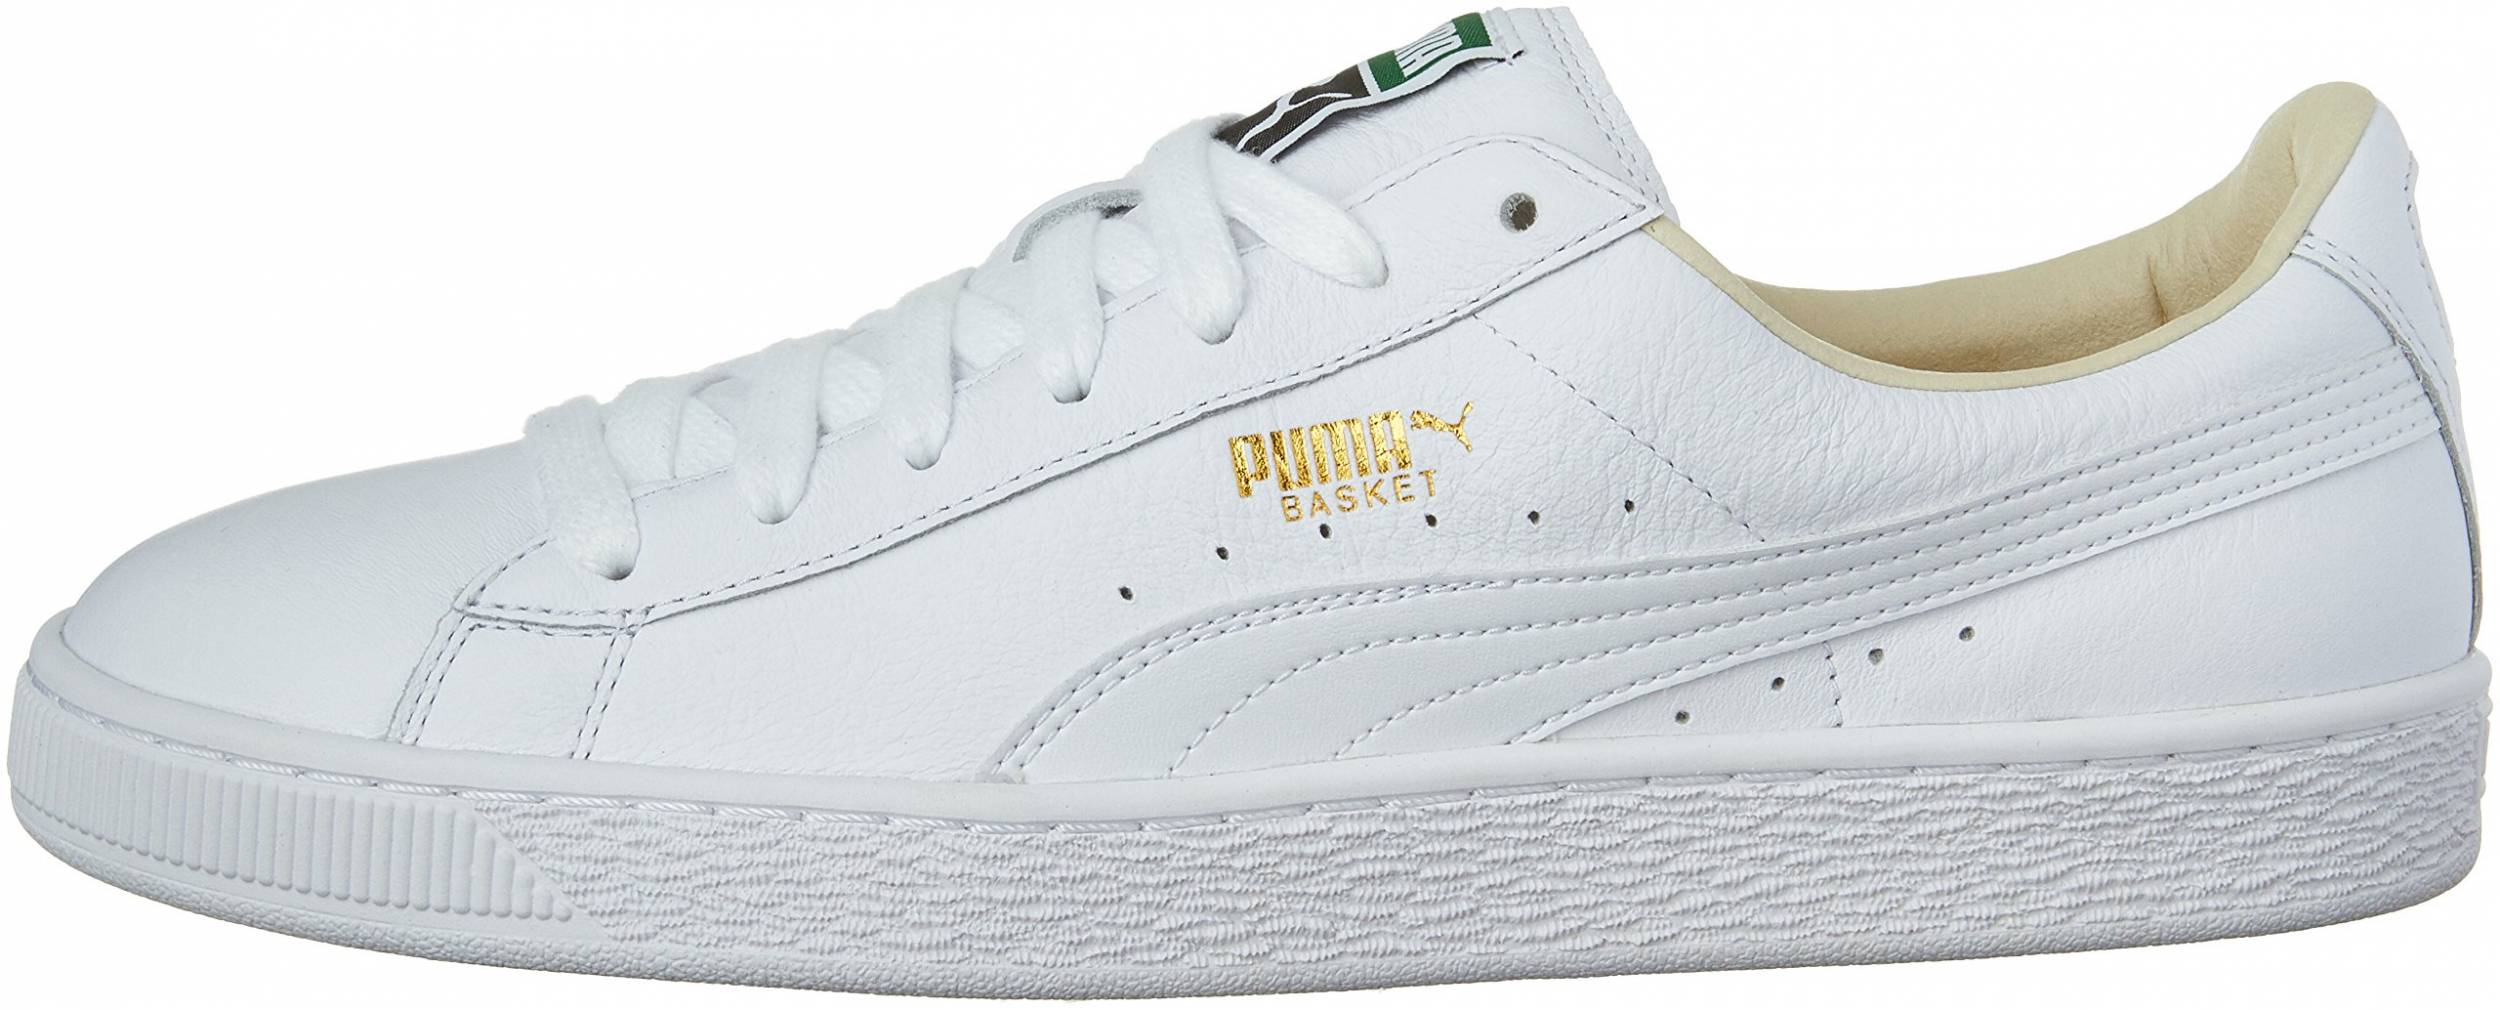 Save 46% on White Puma Sneakers (62 